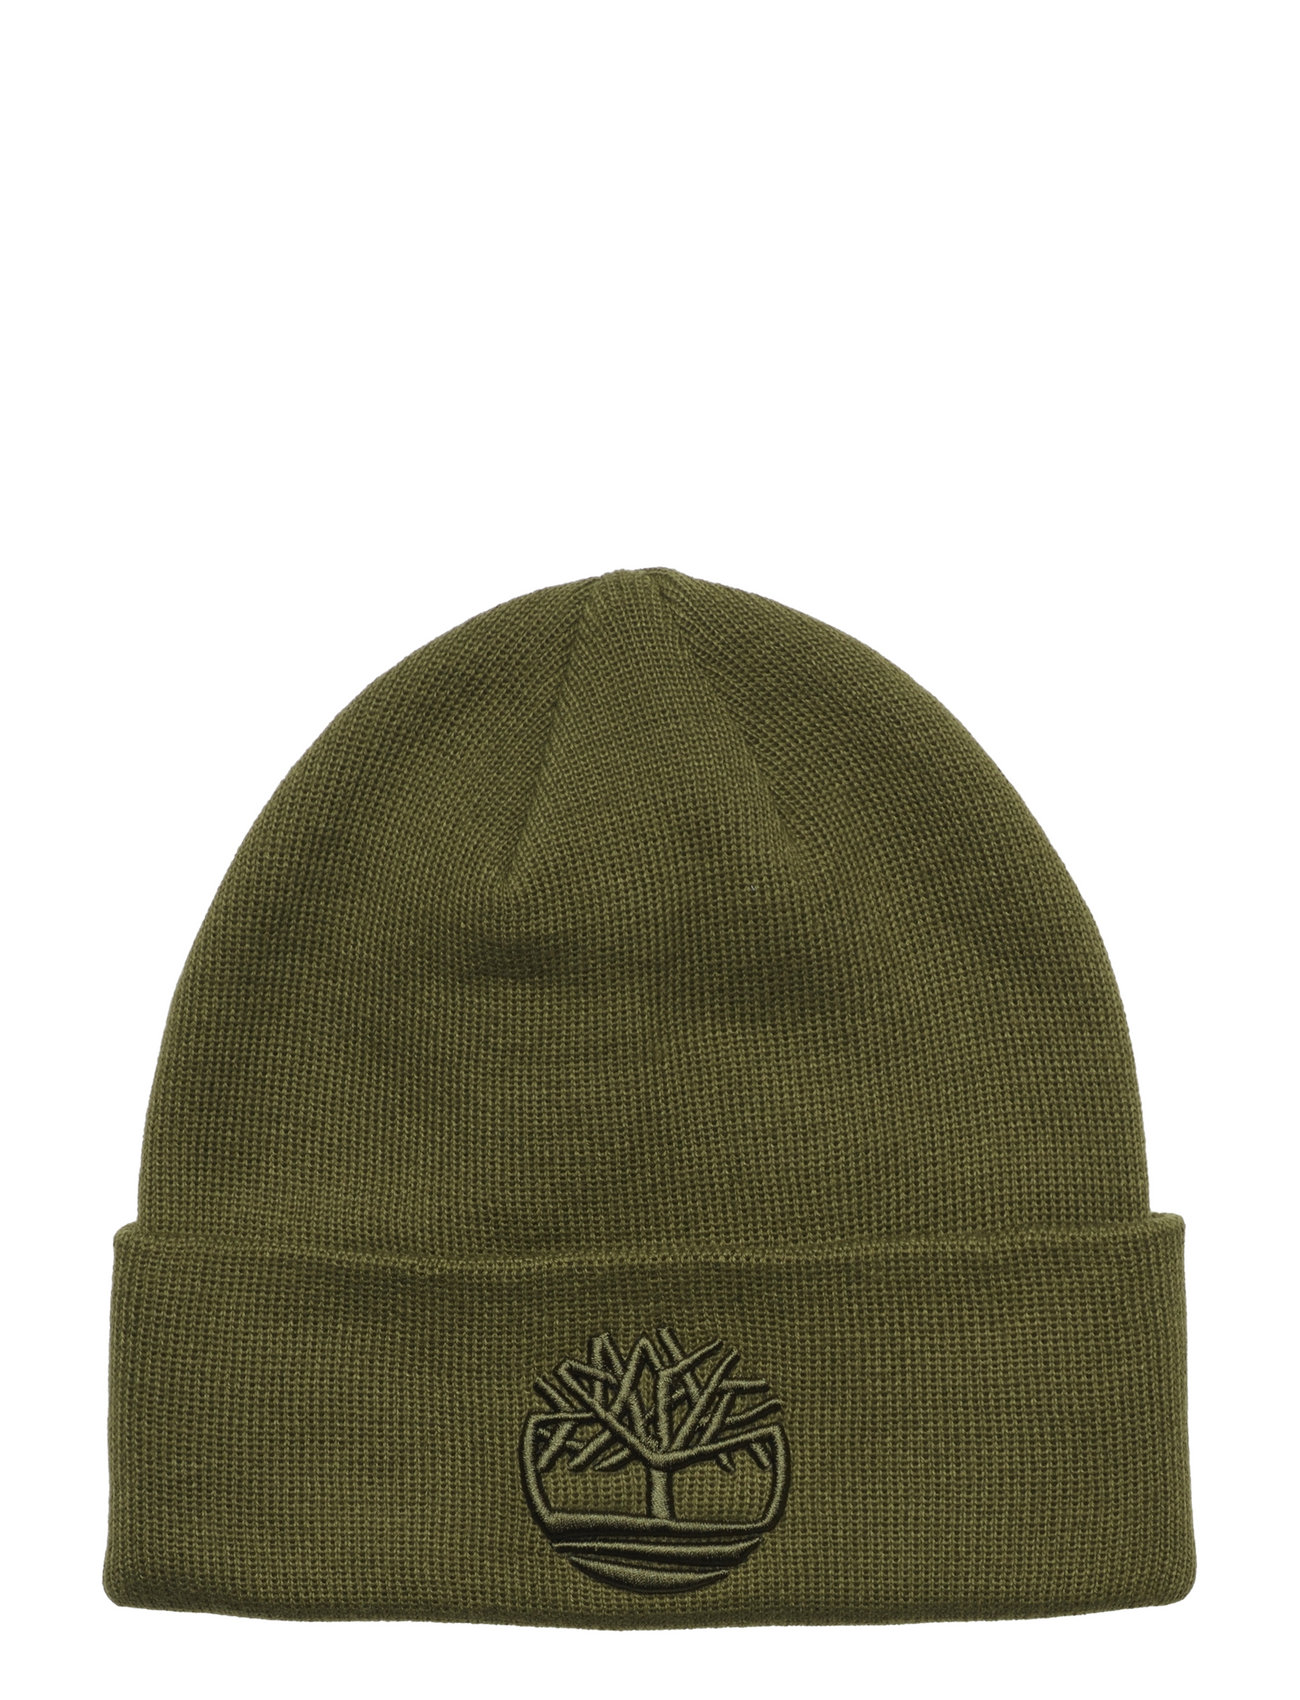 Timberland Tonal 3d Hats - Beanie Embroidery